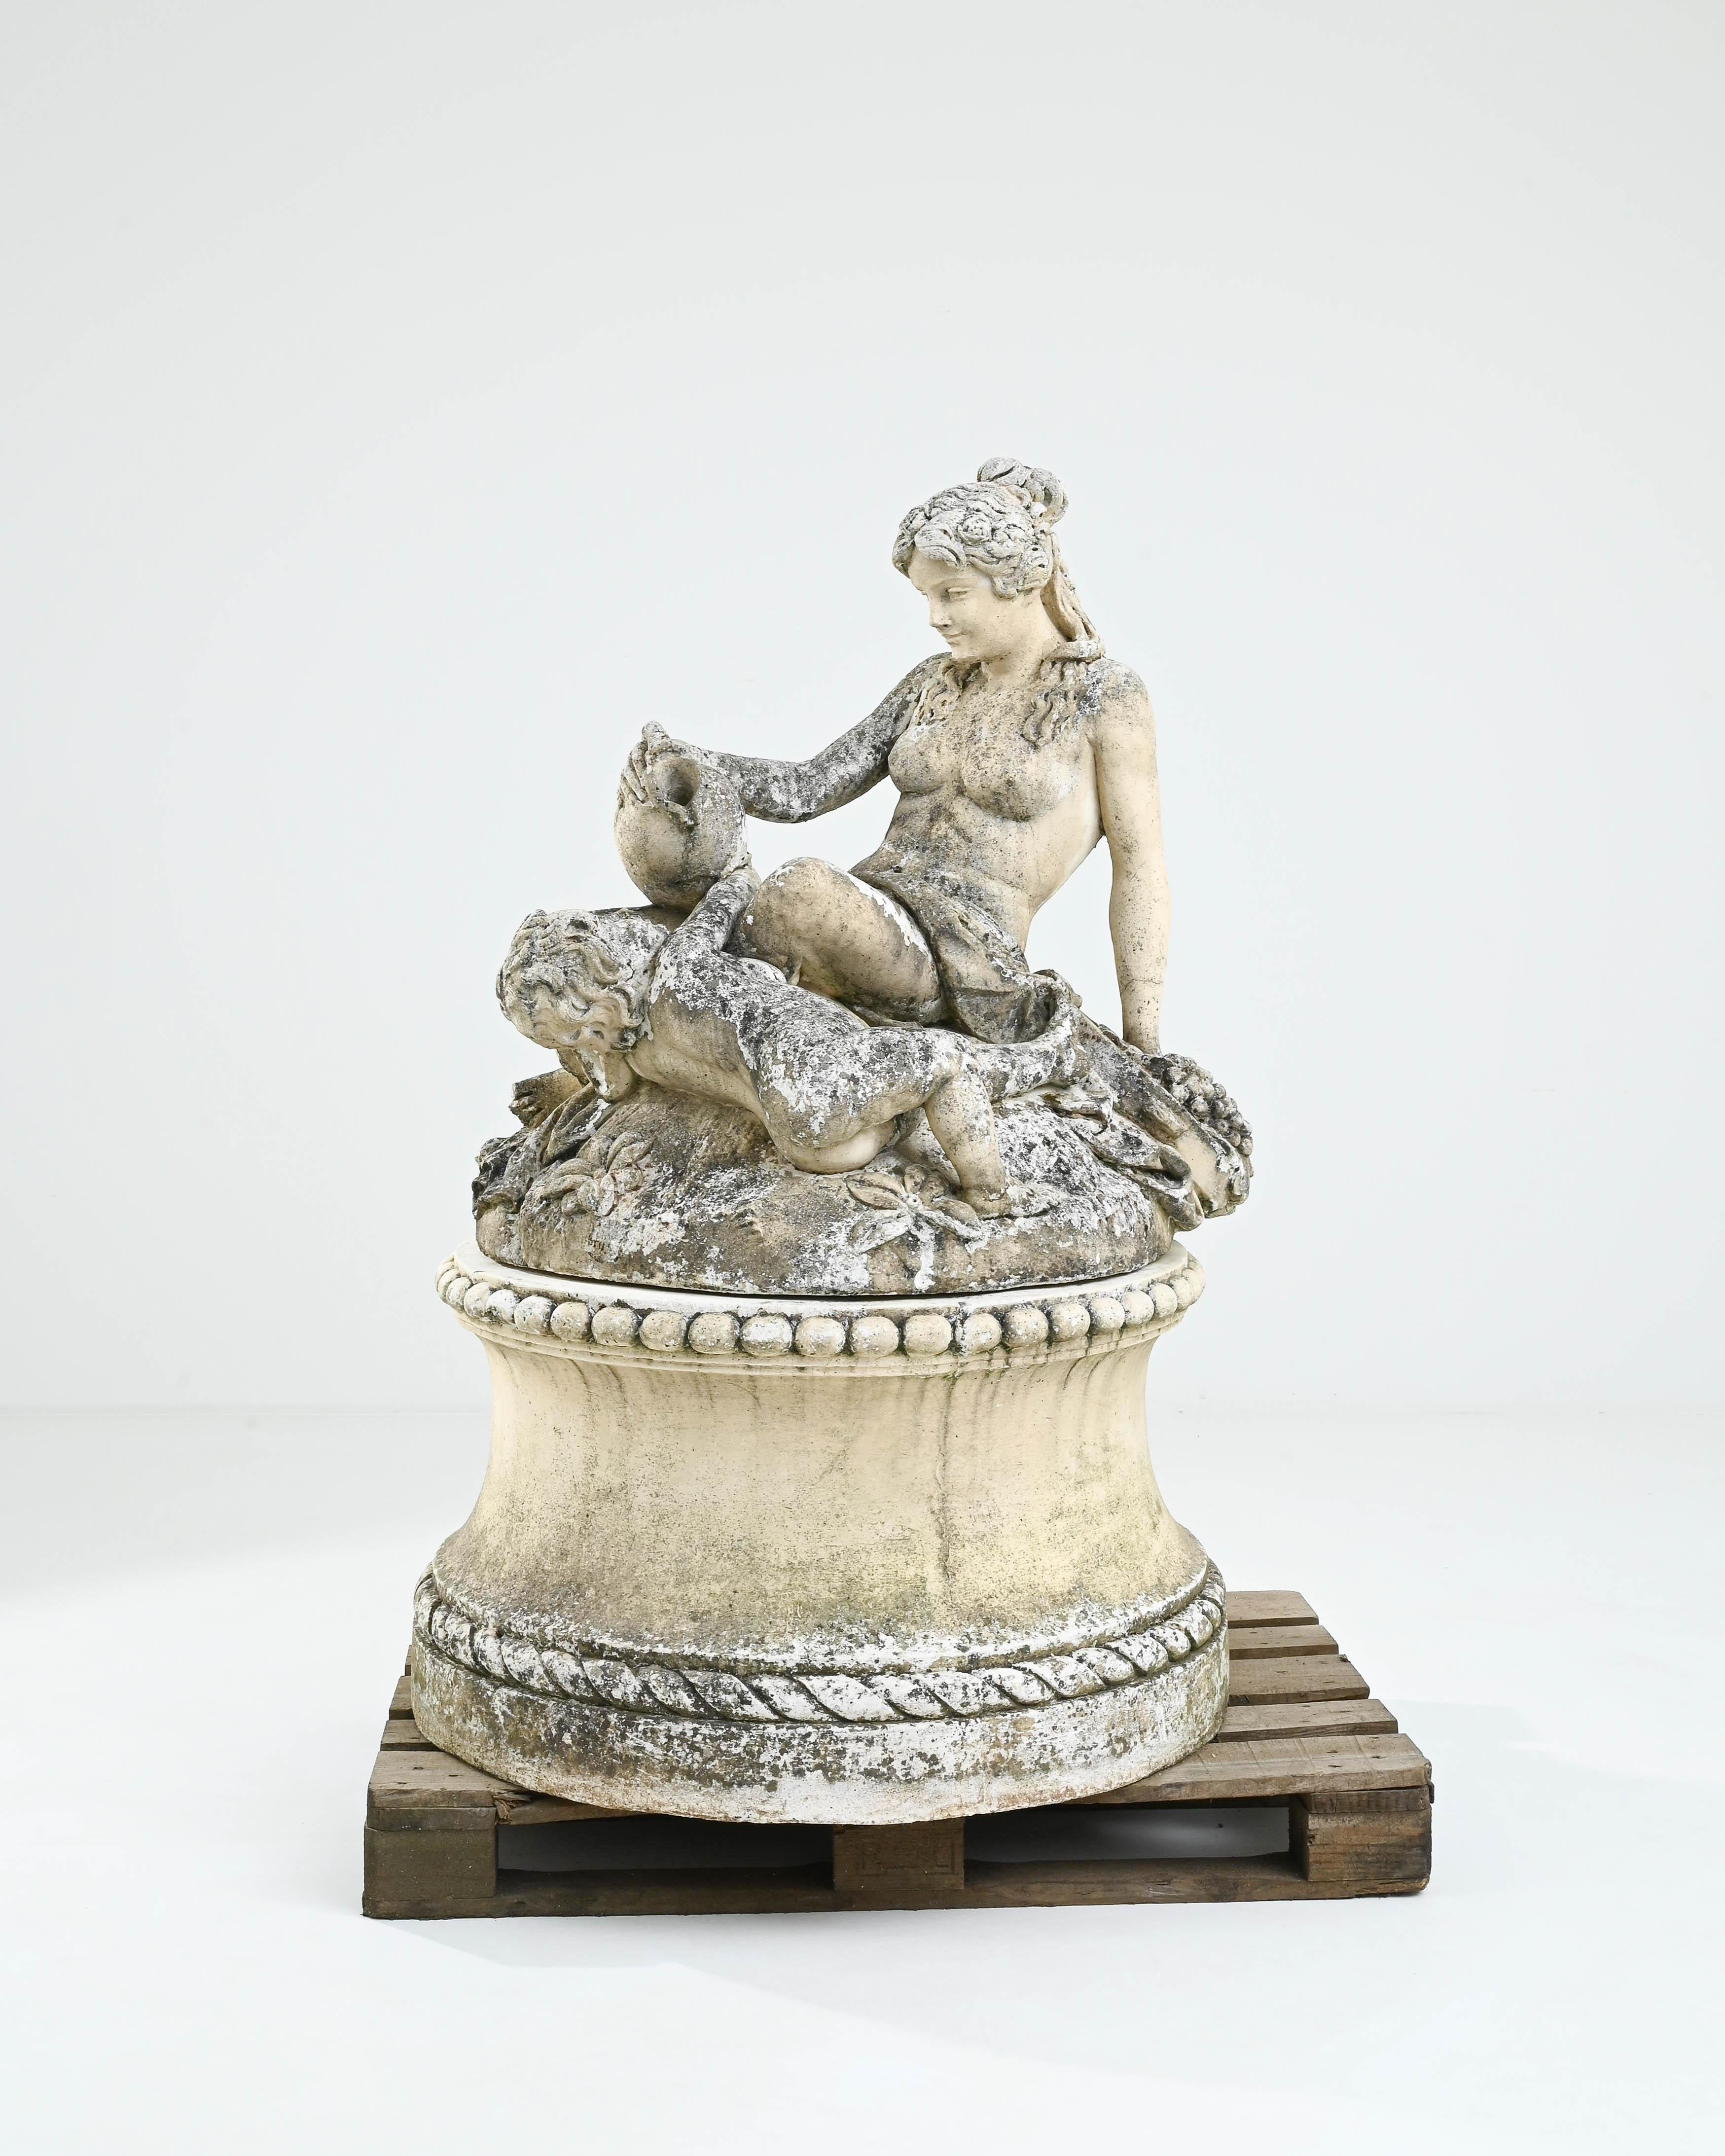 This delightful vintage garden sculpture depicting a nymph and a cherub has a Rococo levity despite its impressive stature. Made in France in the 20th century, a round base elevates the figures, who are seated naked as if upon a grassy mound. With a